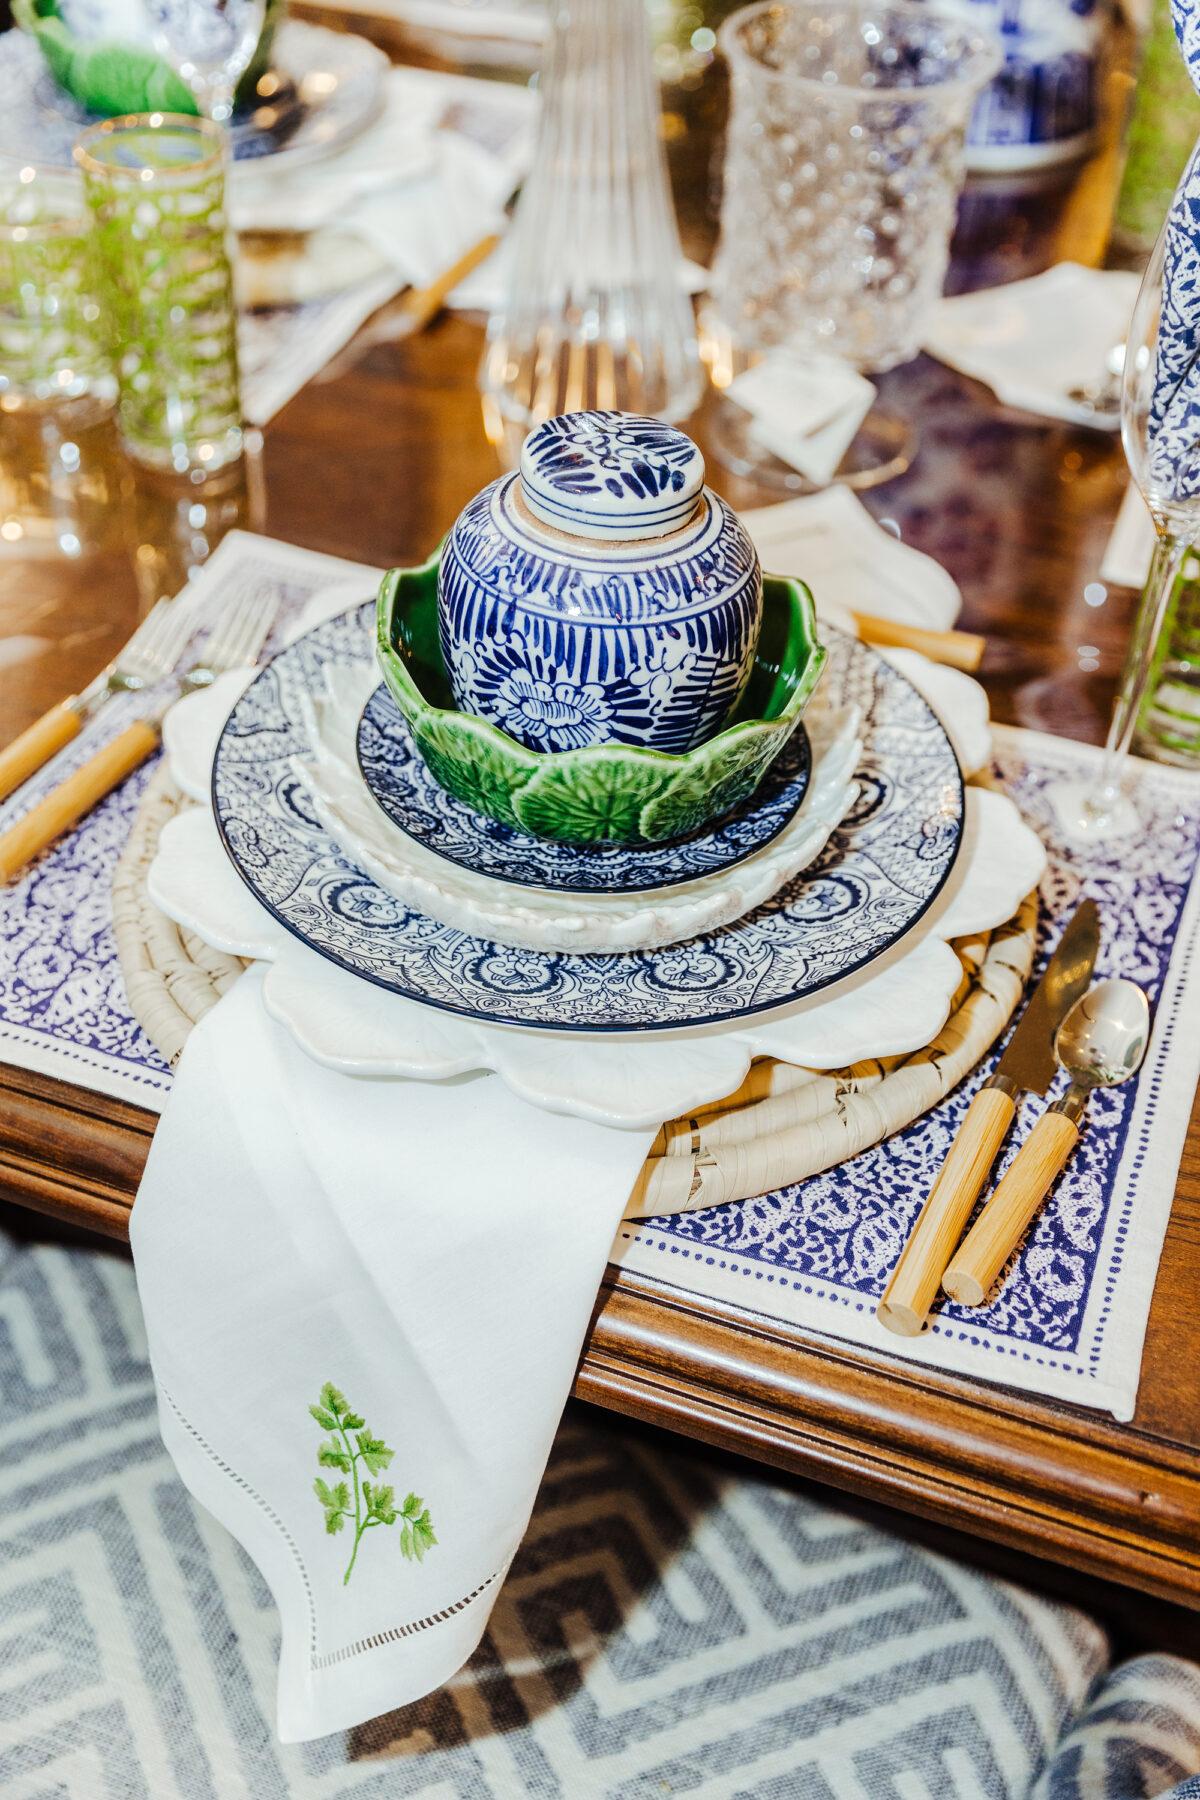 Patterned placemats are a fantastic way to introduce some interest to a table setting. (Provided photo/TNS)